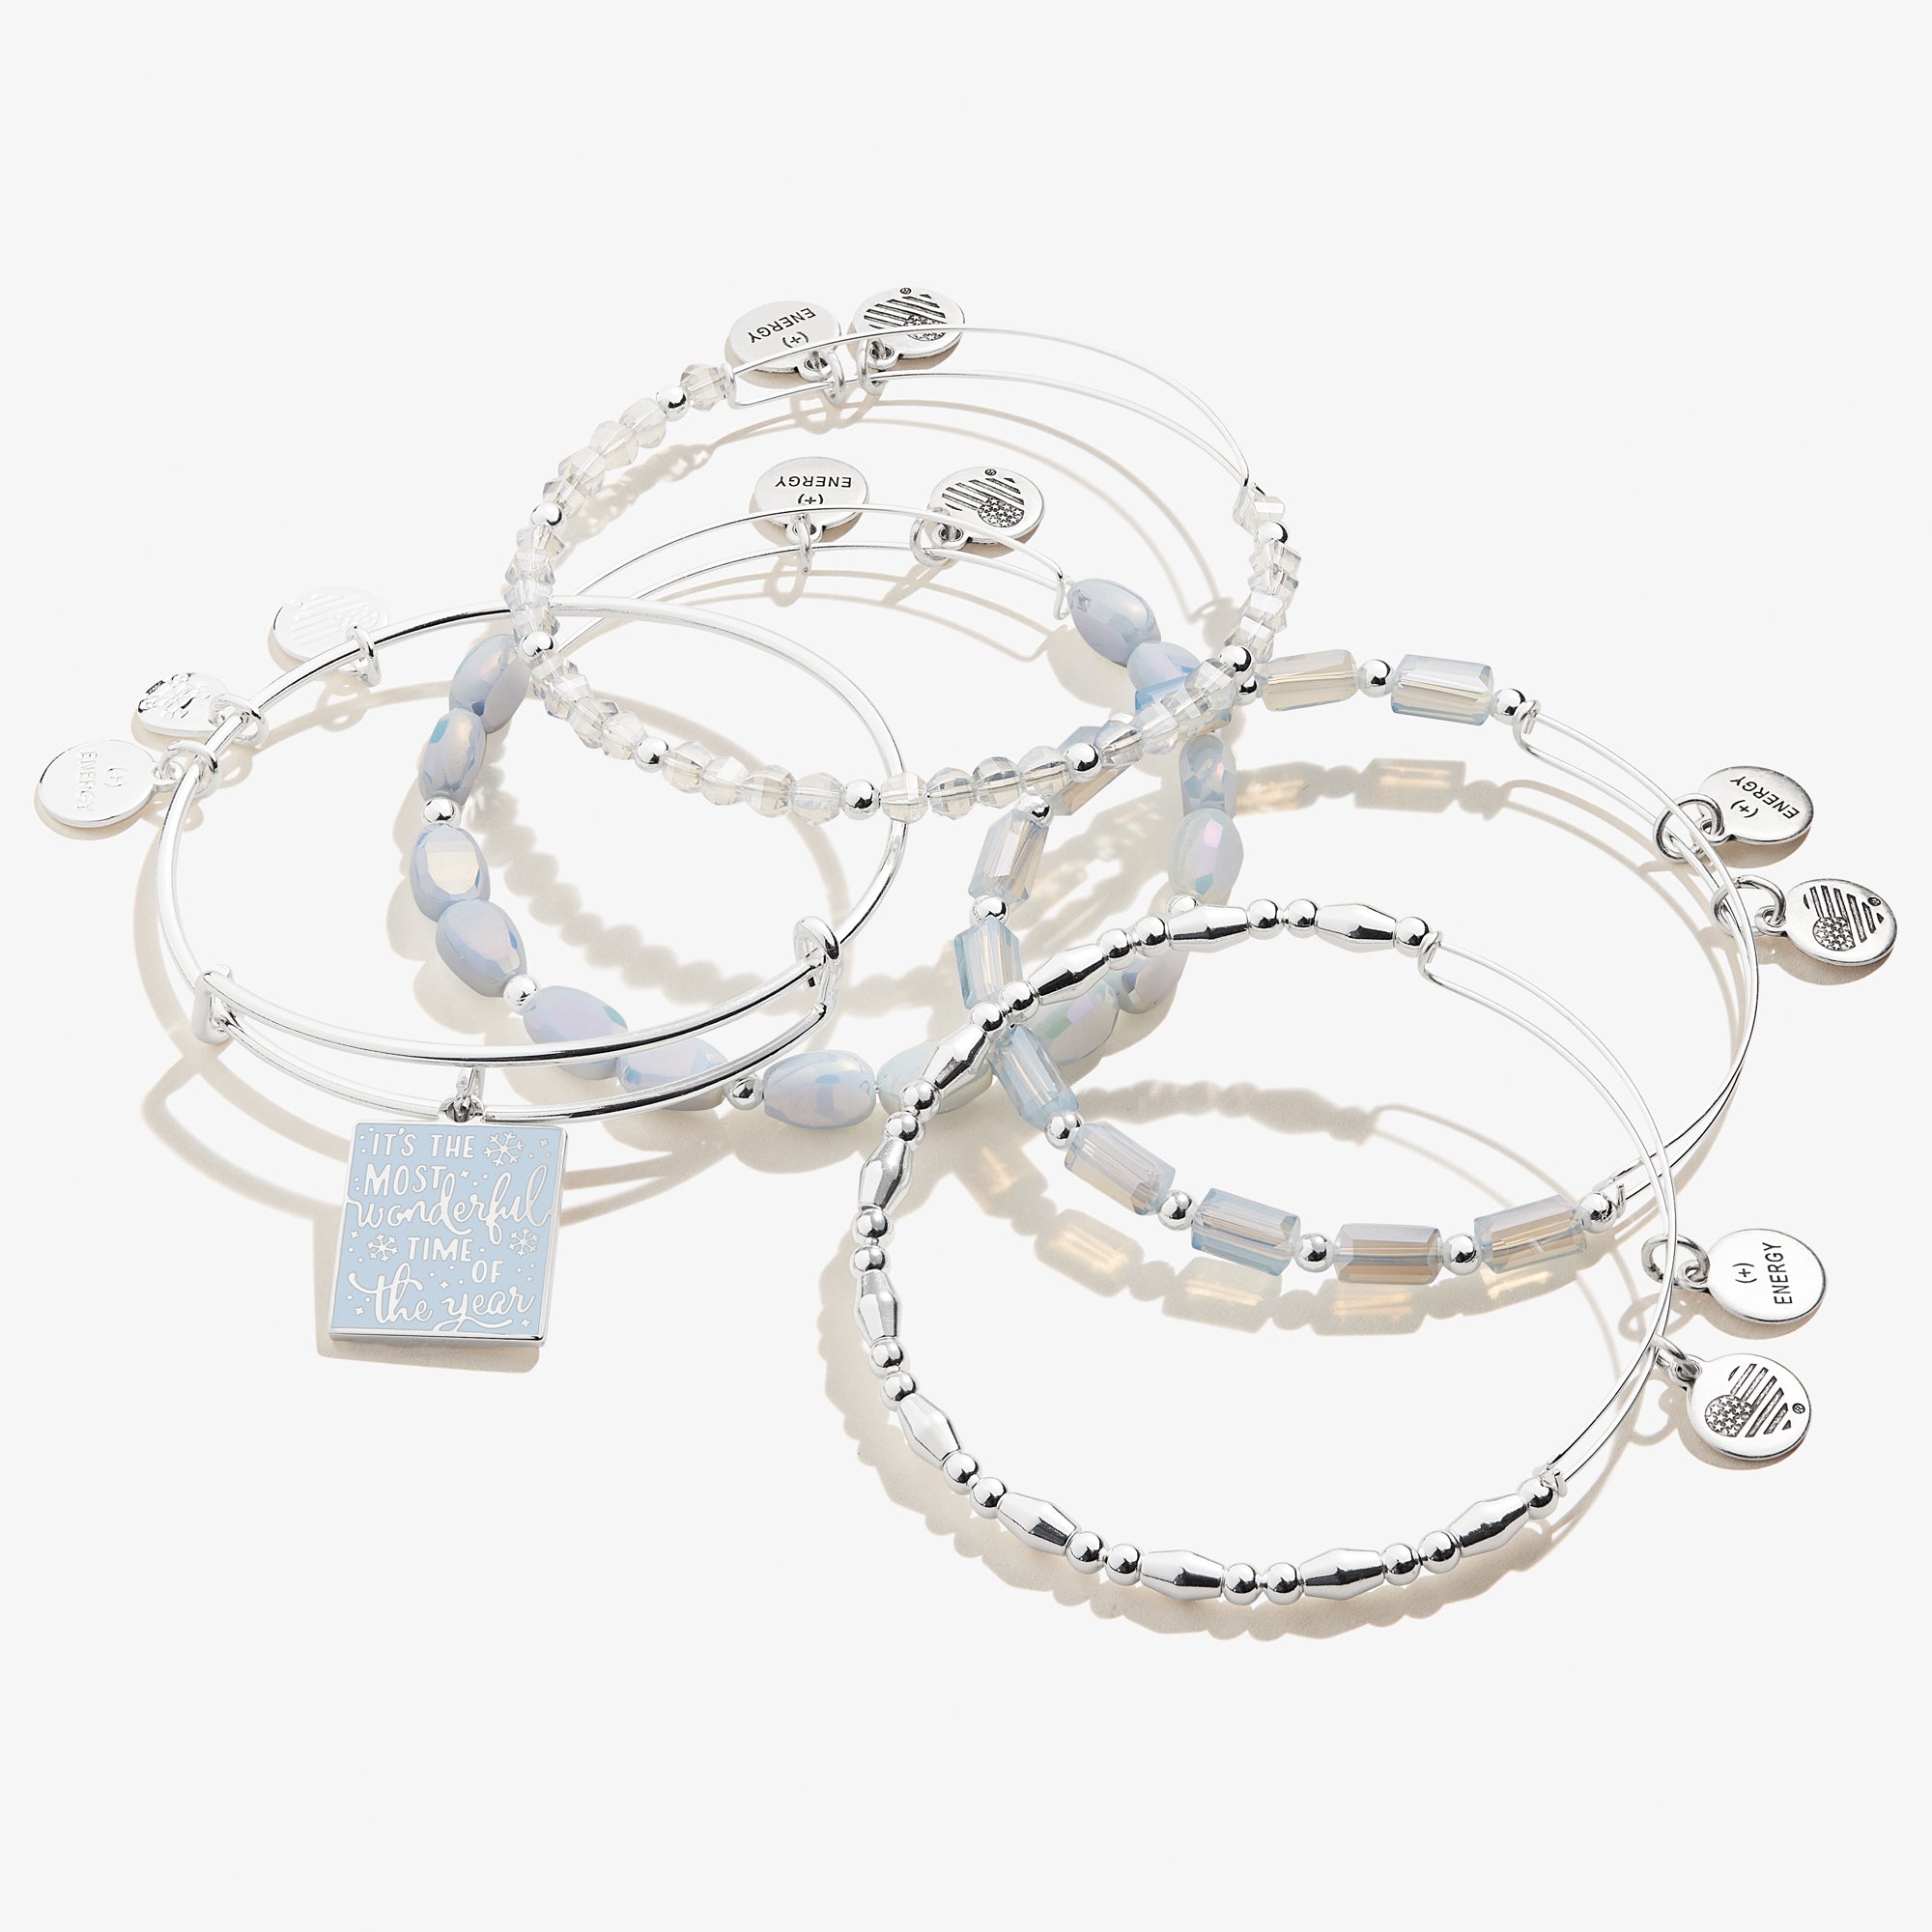 It's The Most Wonderful Time of the Year' Charm Bangle, Set of 5